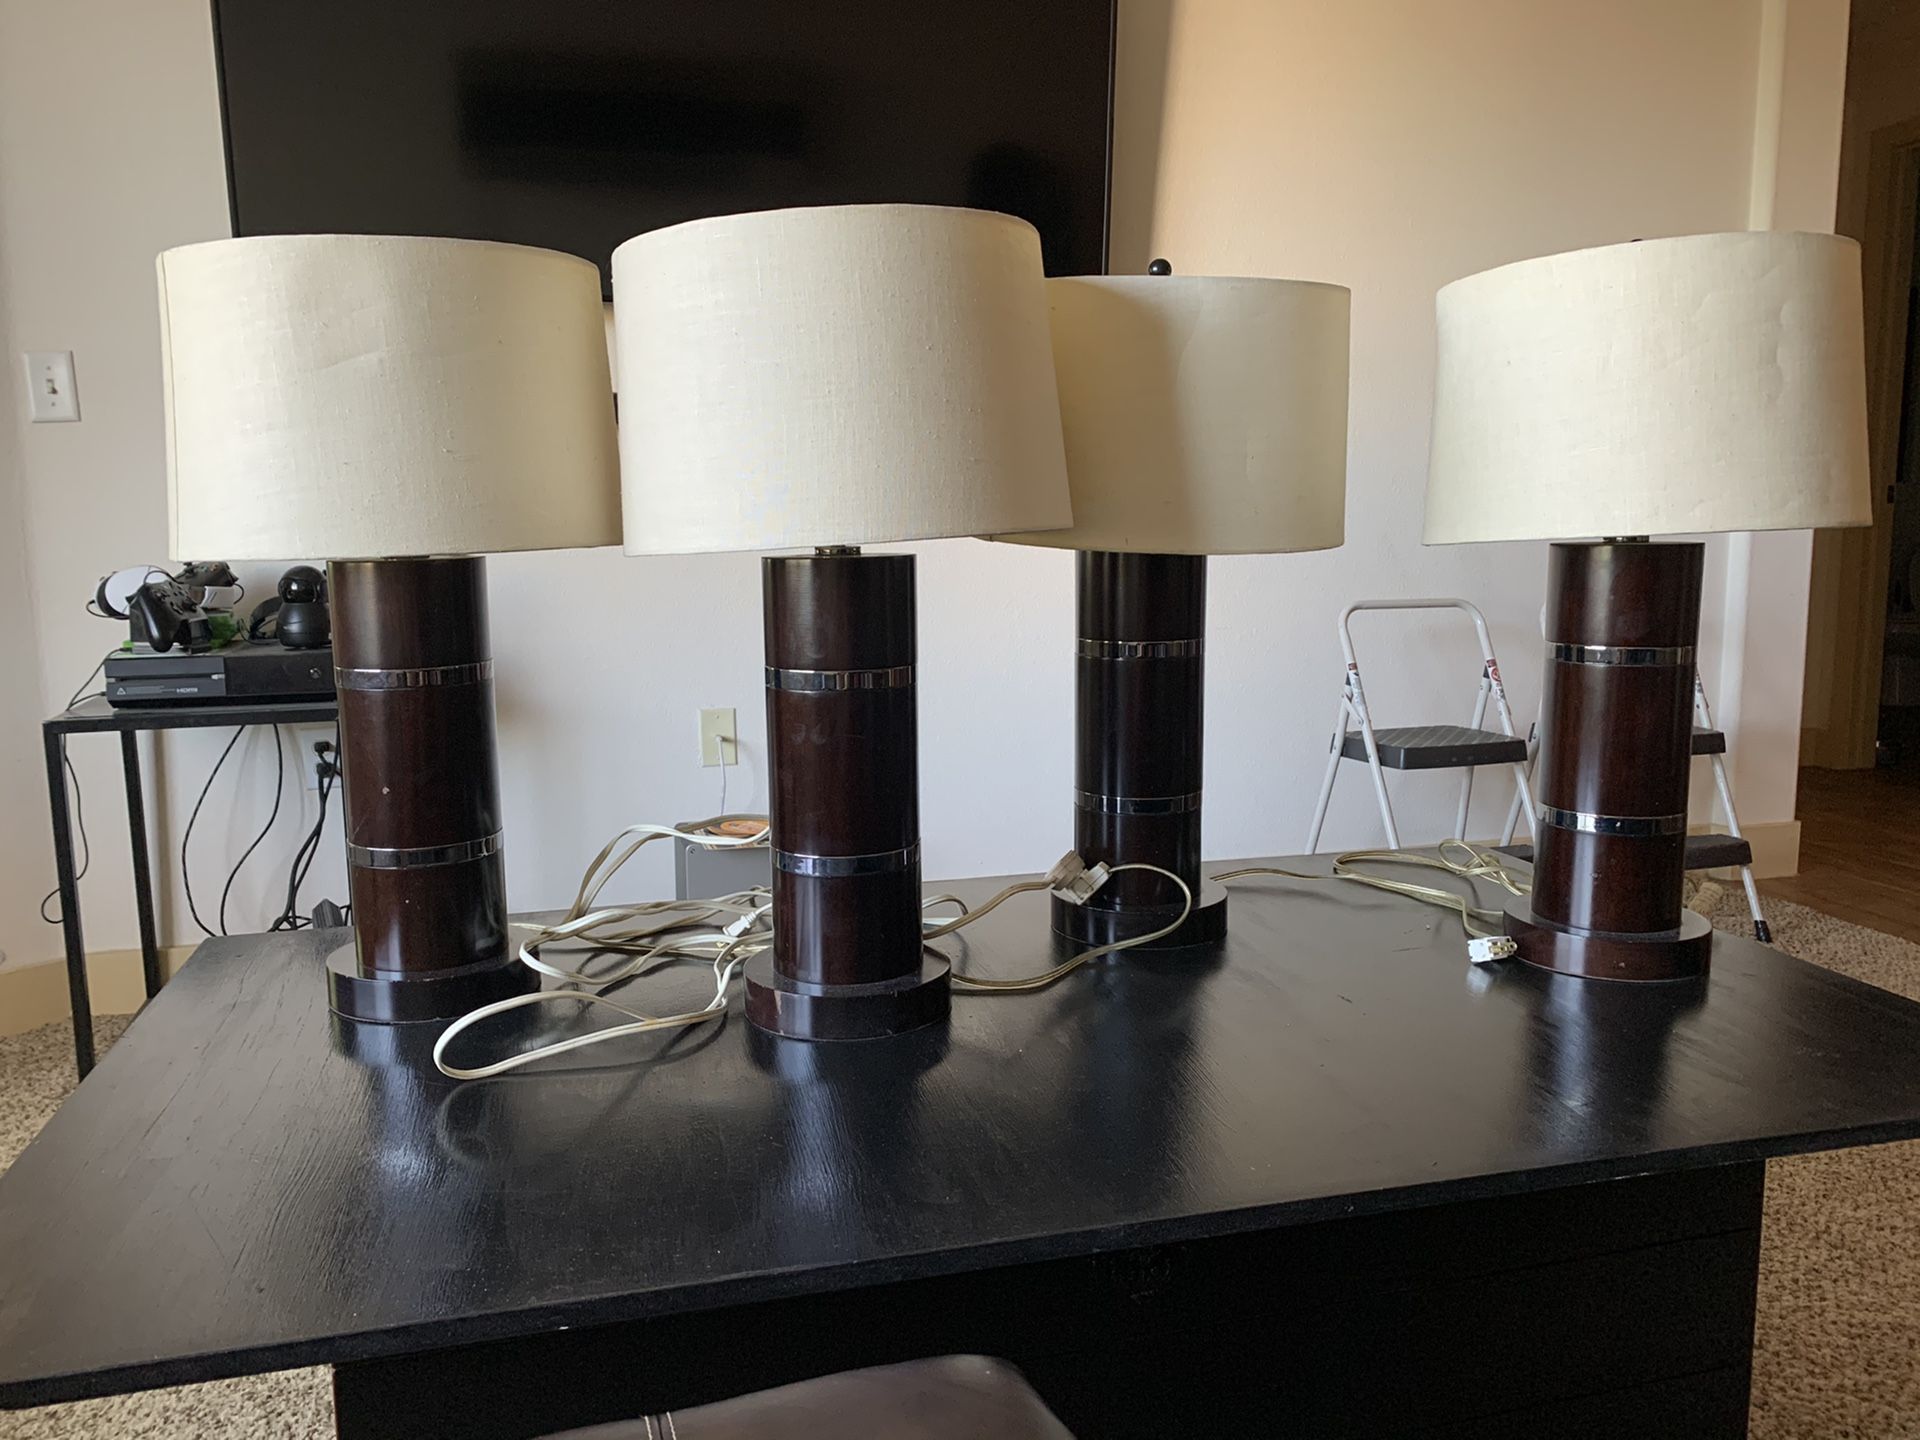 4 lamps